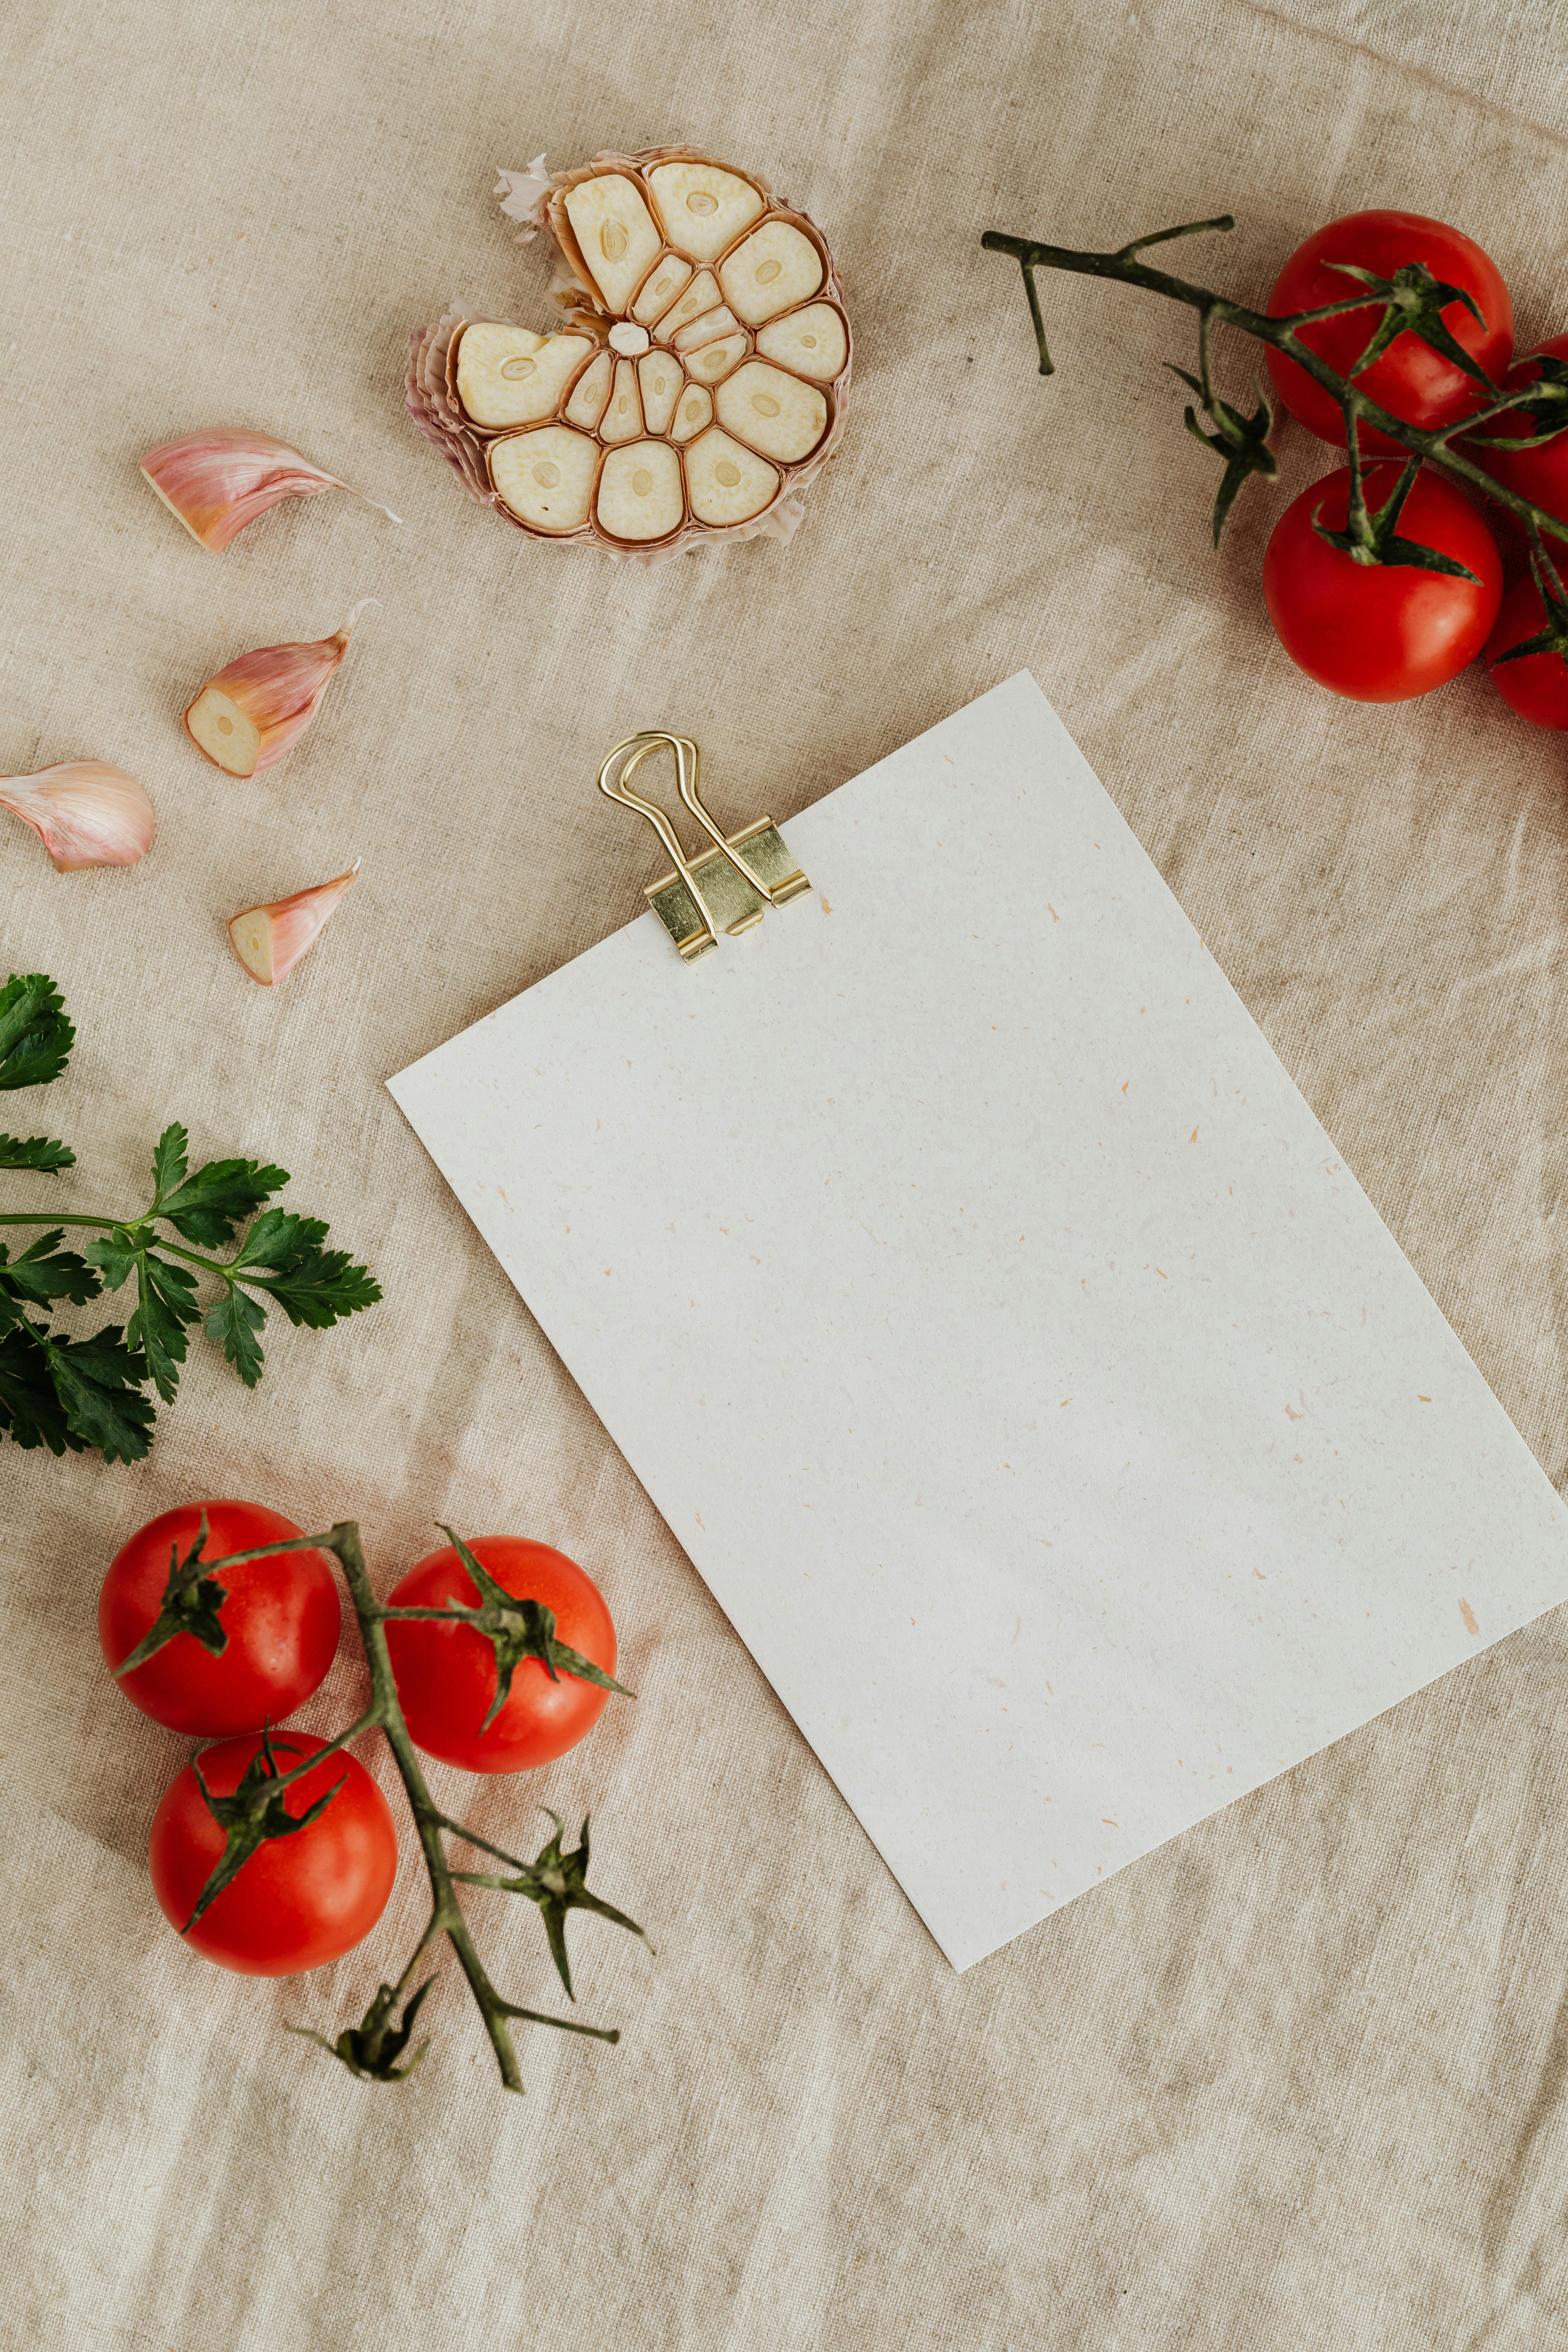 Set of tasty fresh vegetables and herbs with empty clipboard